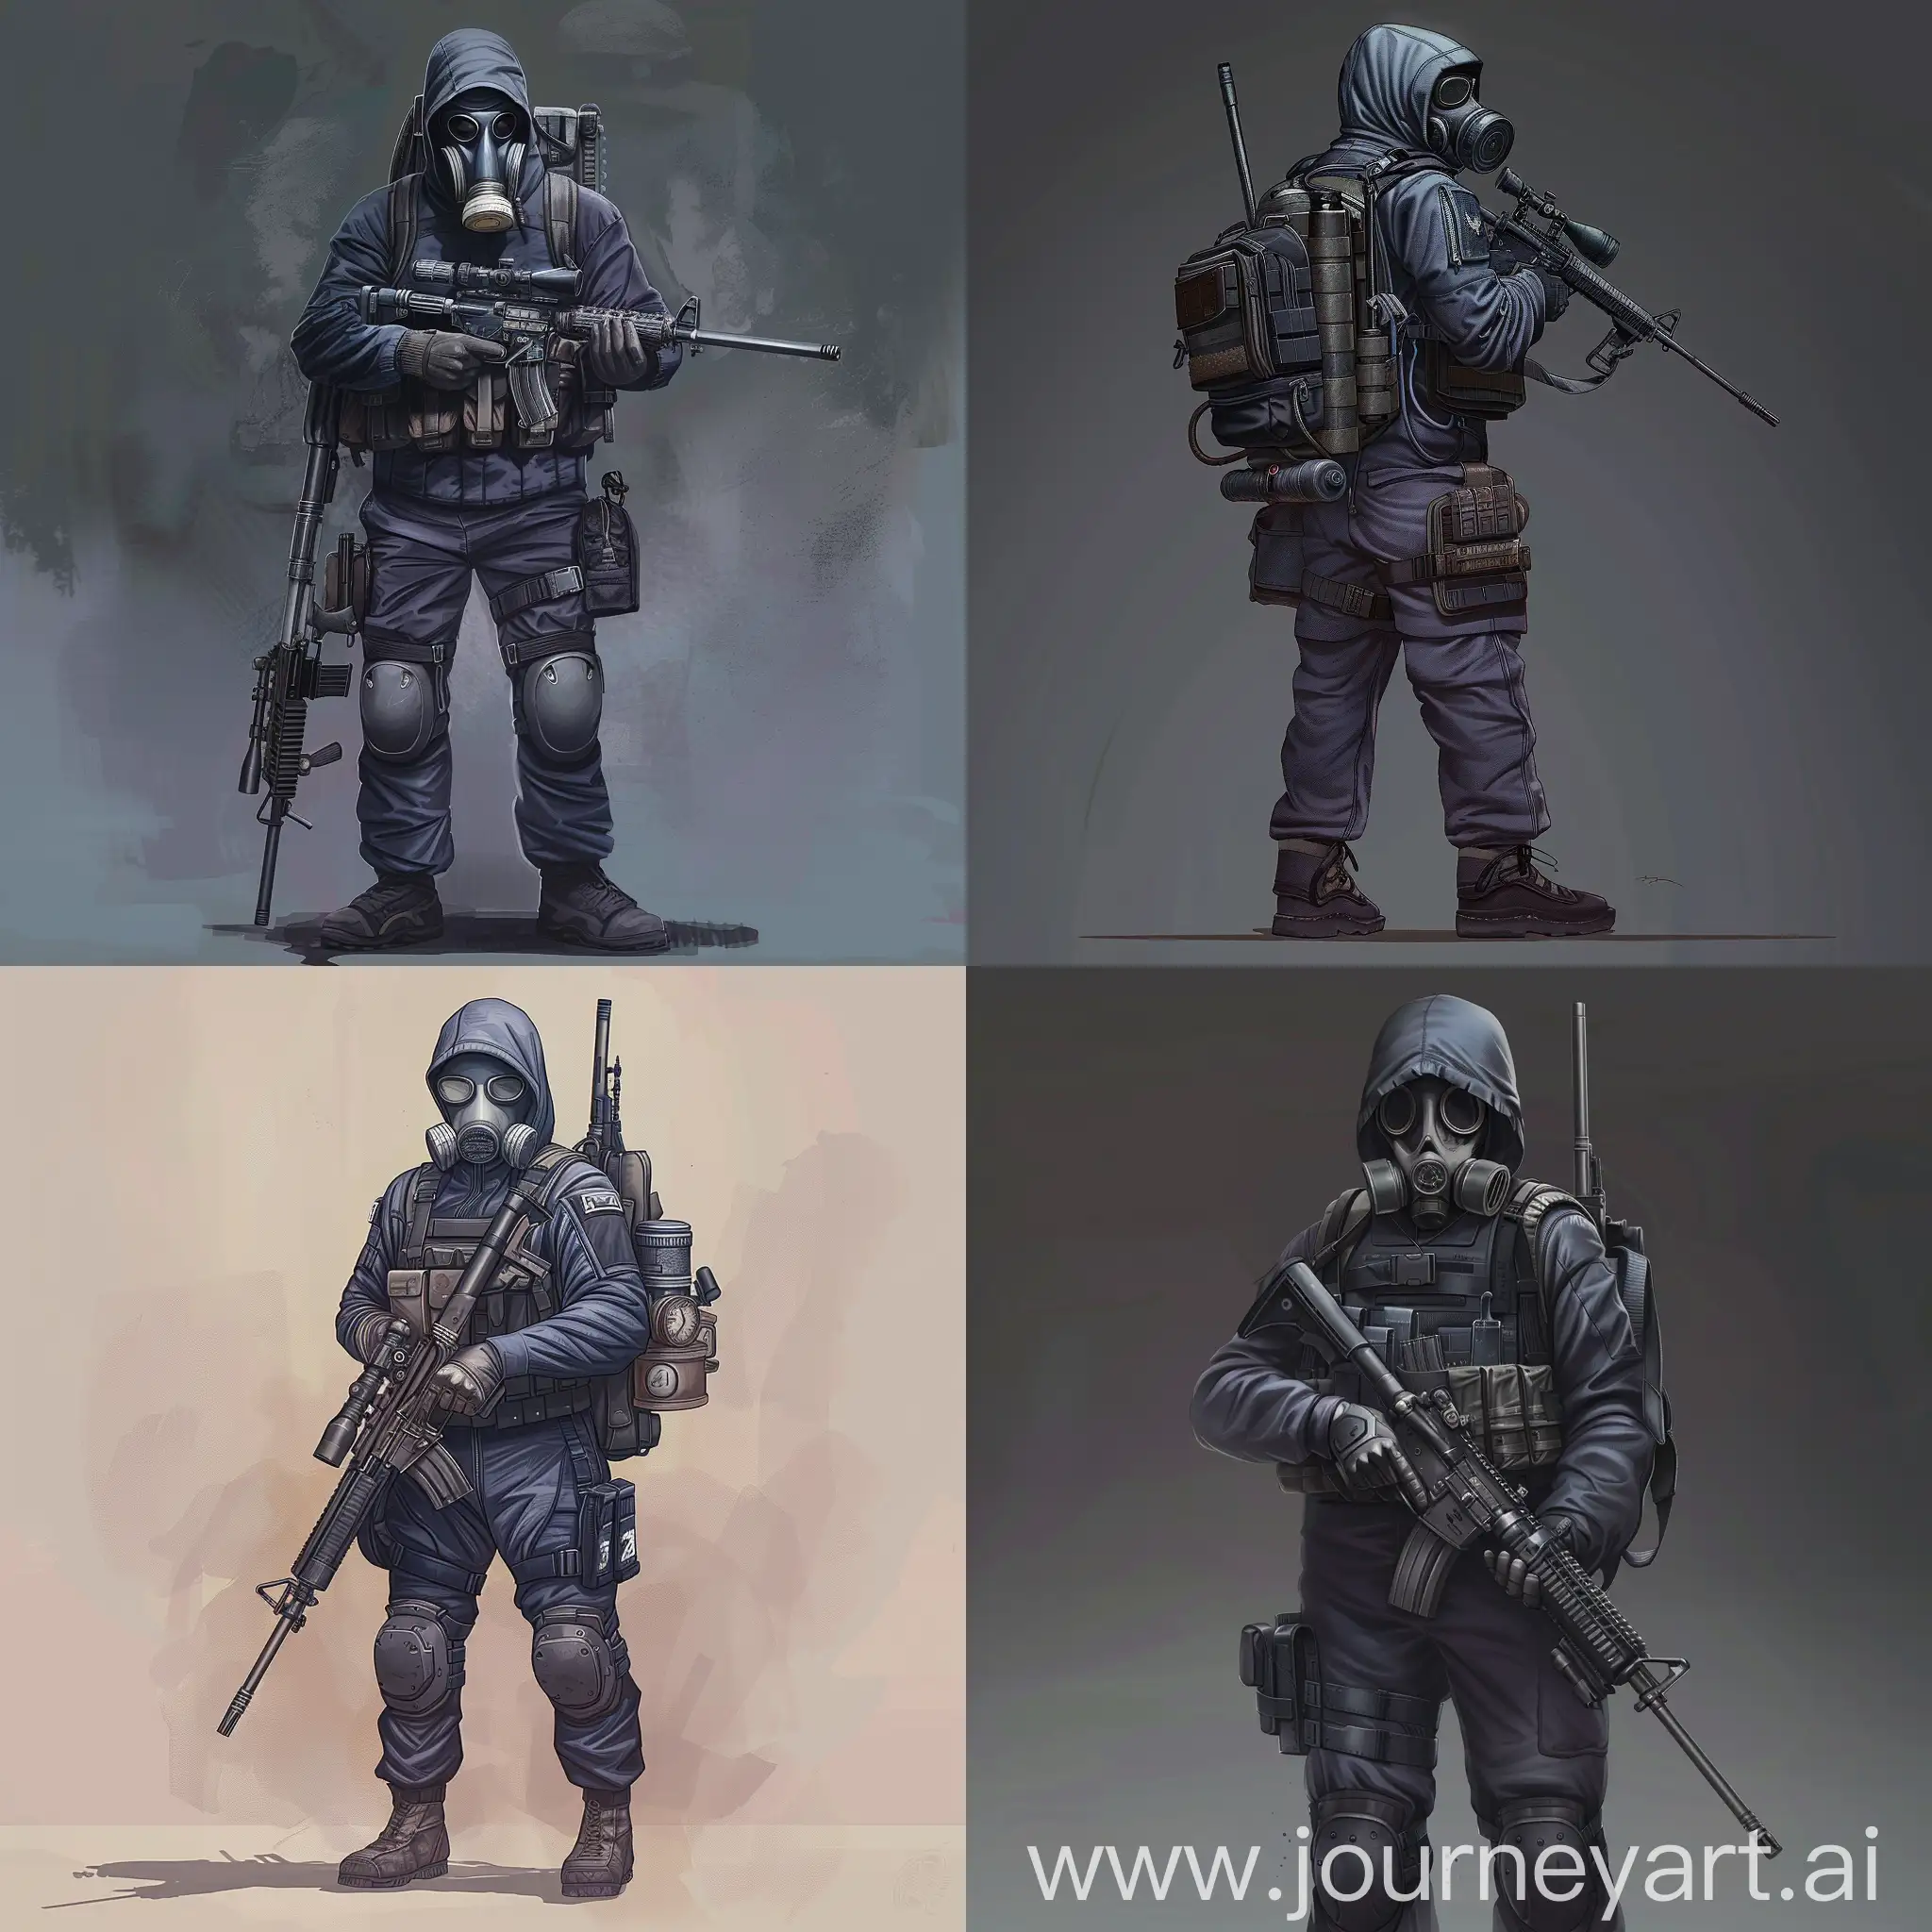 Digital character art, concept game art, mercenary, STALKER game, dark purple military jumpsuit, gasmask on face, small military backpack, military unloading on his body, sniper rifle in his hands.